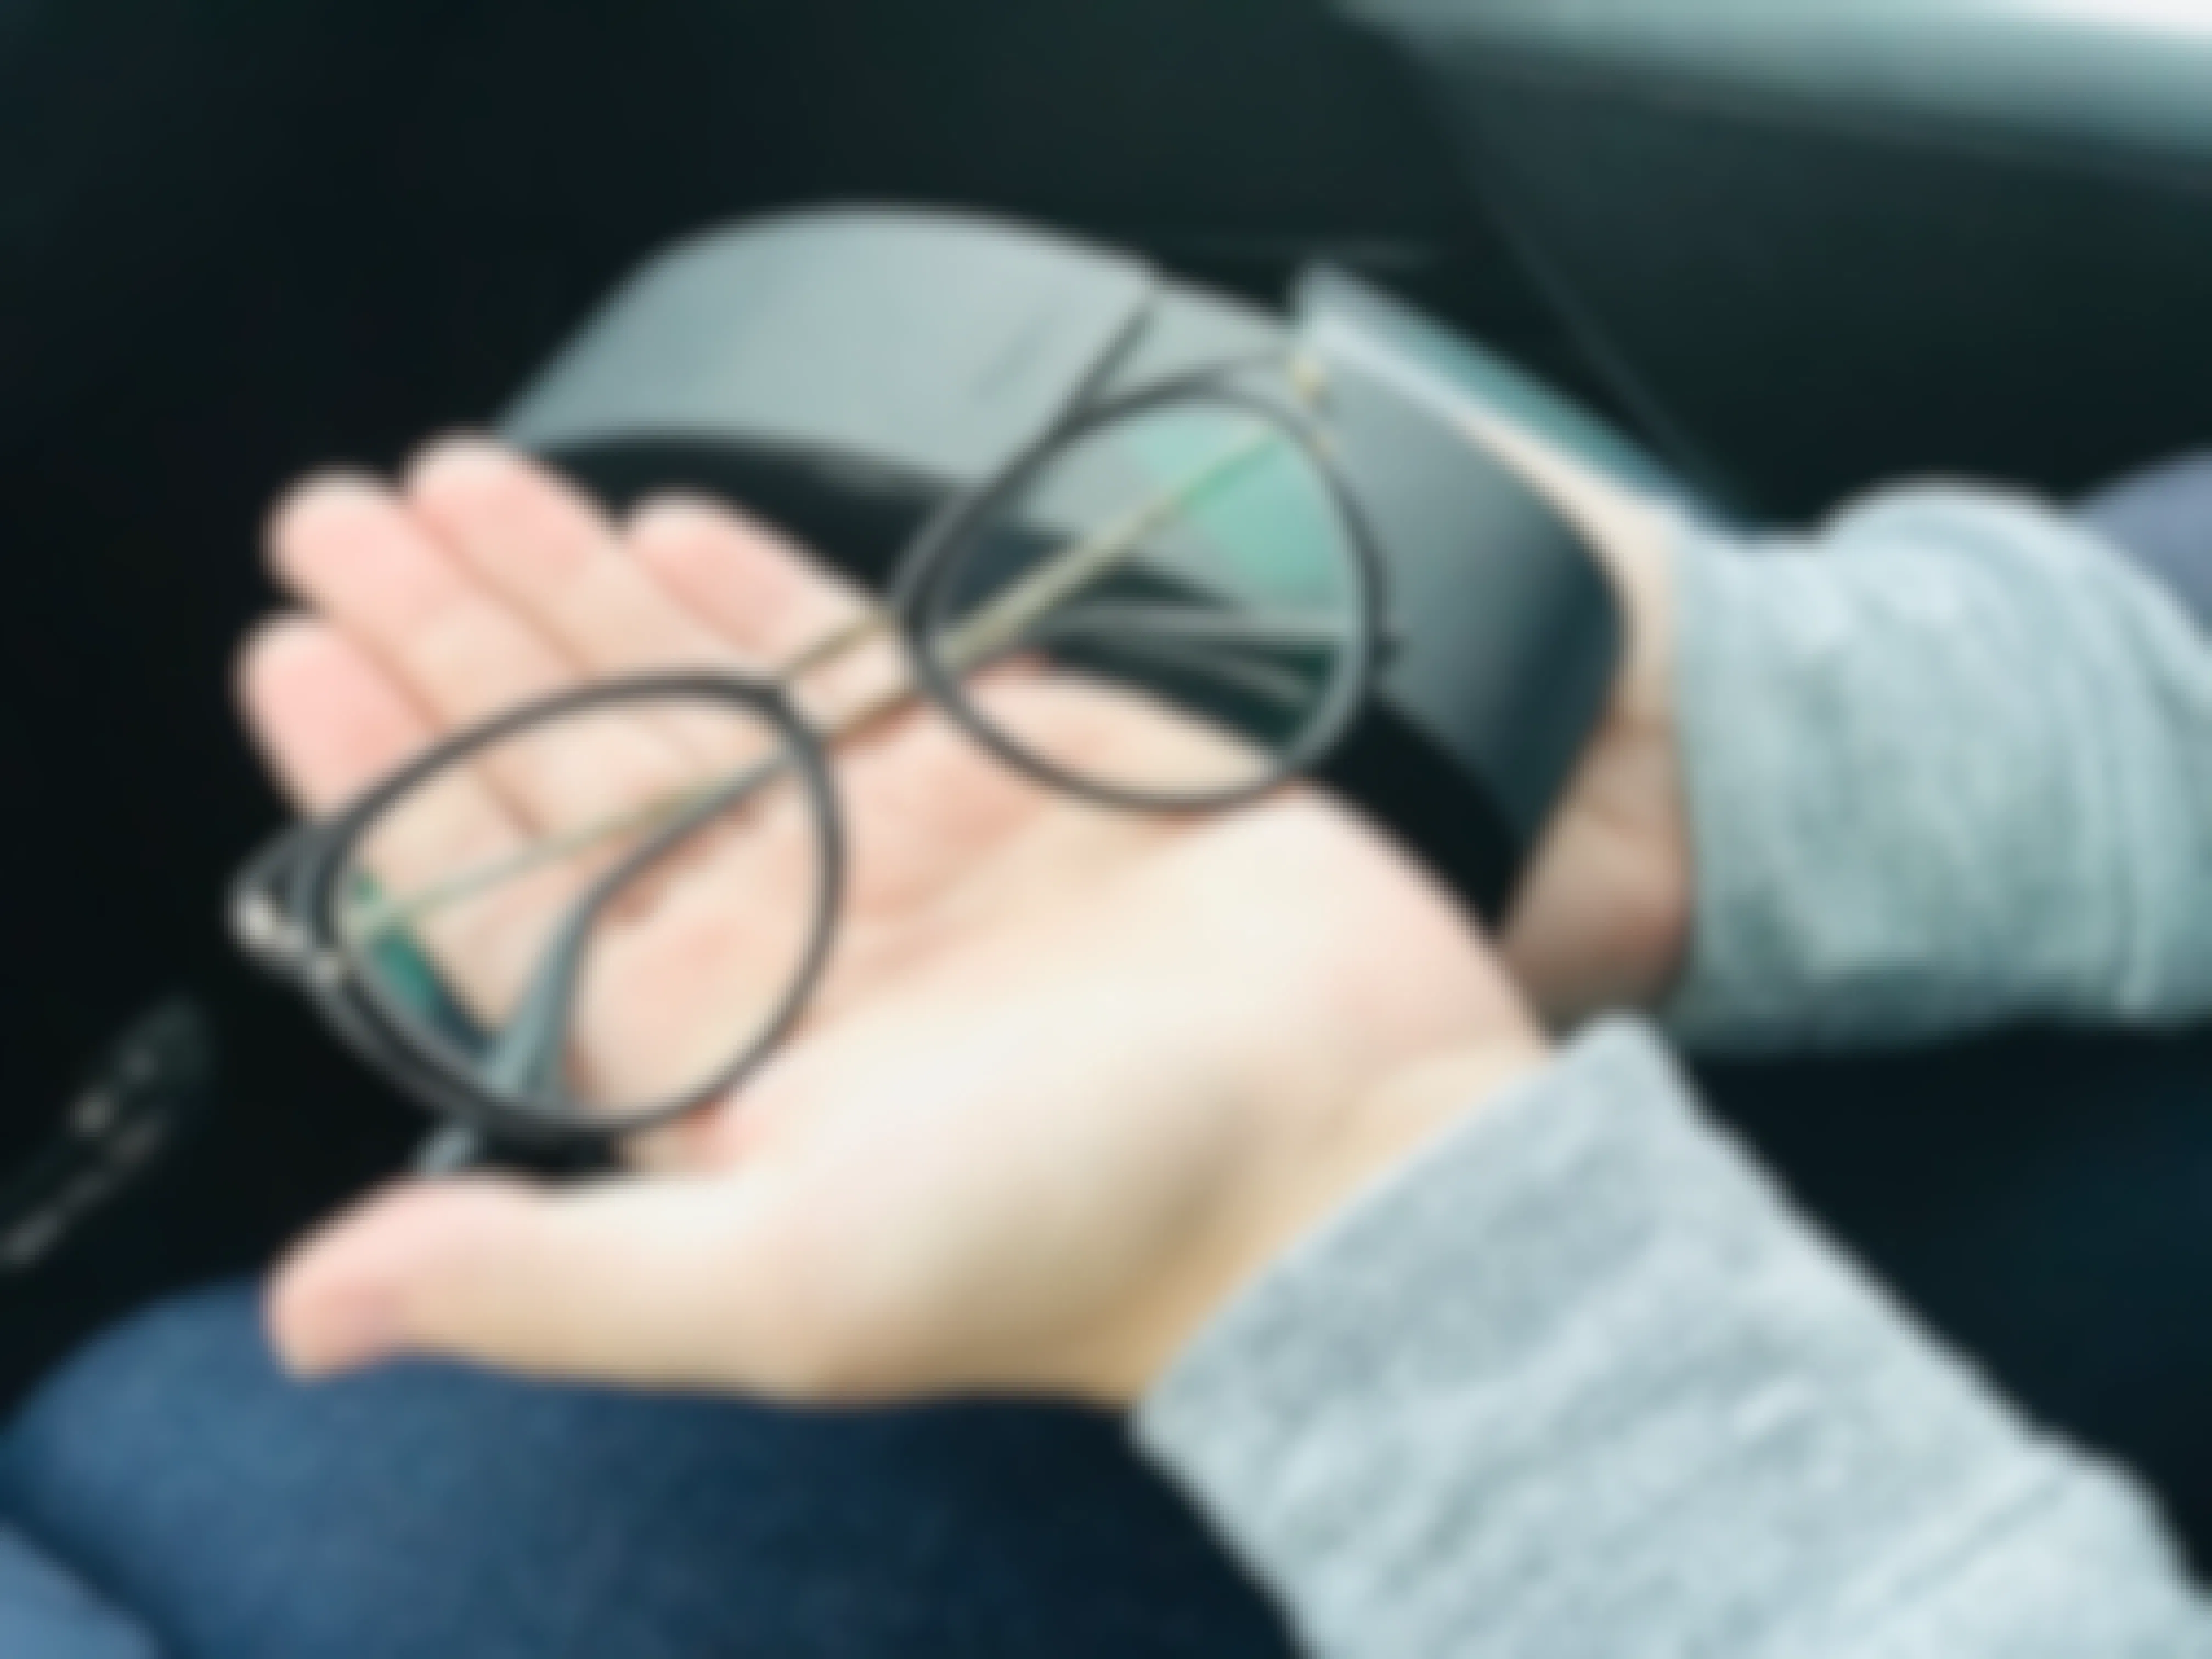 Open hand displaying a new pair of eyeglasses.